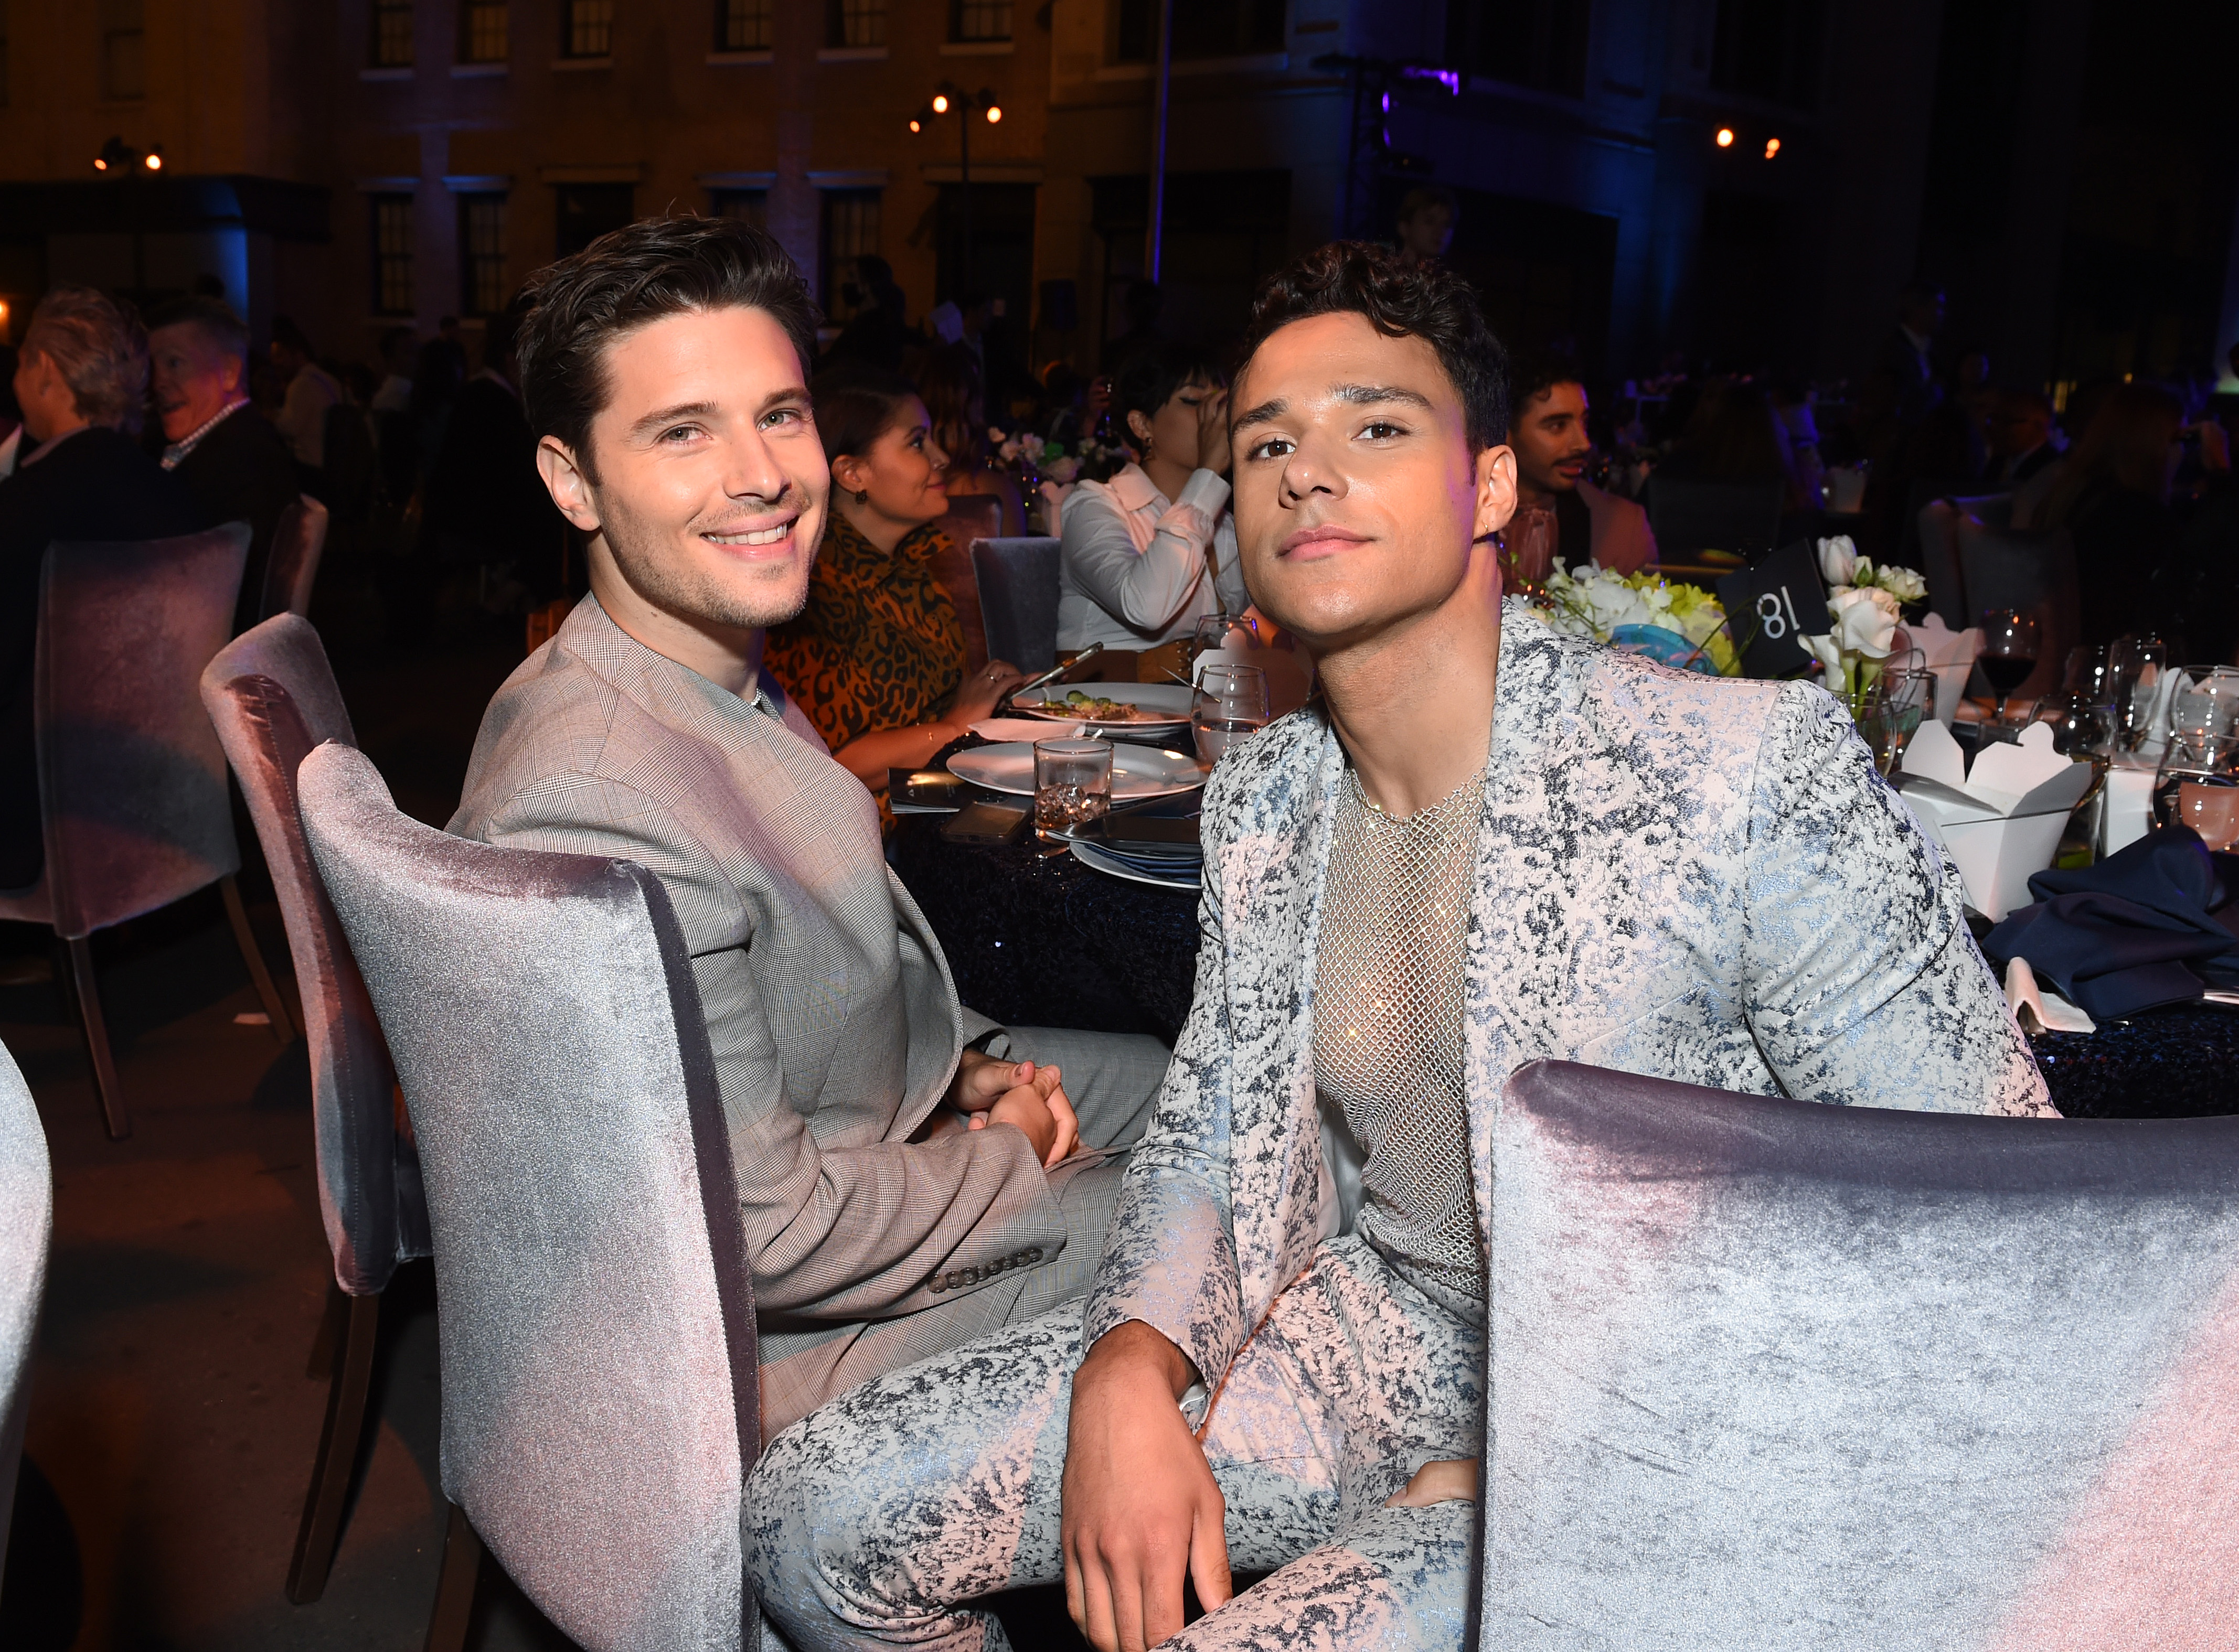 Ronen Rubinstein and Rafael Silva at the Outfest Legacy Awards on October 22, 2022, in Los Angeles, California | Source: Getty Images